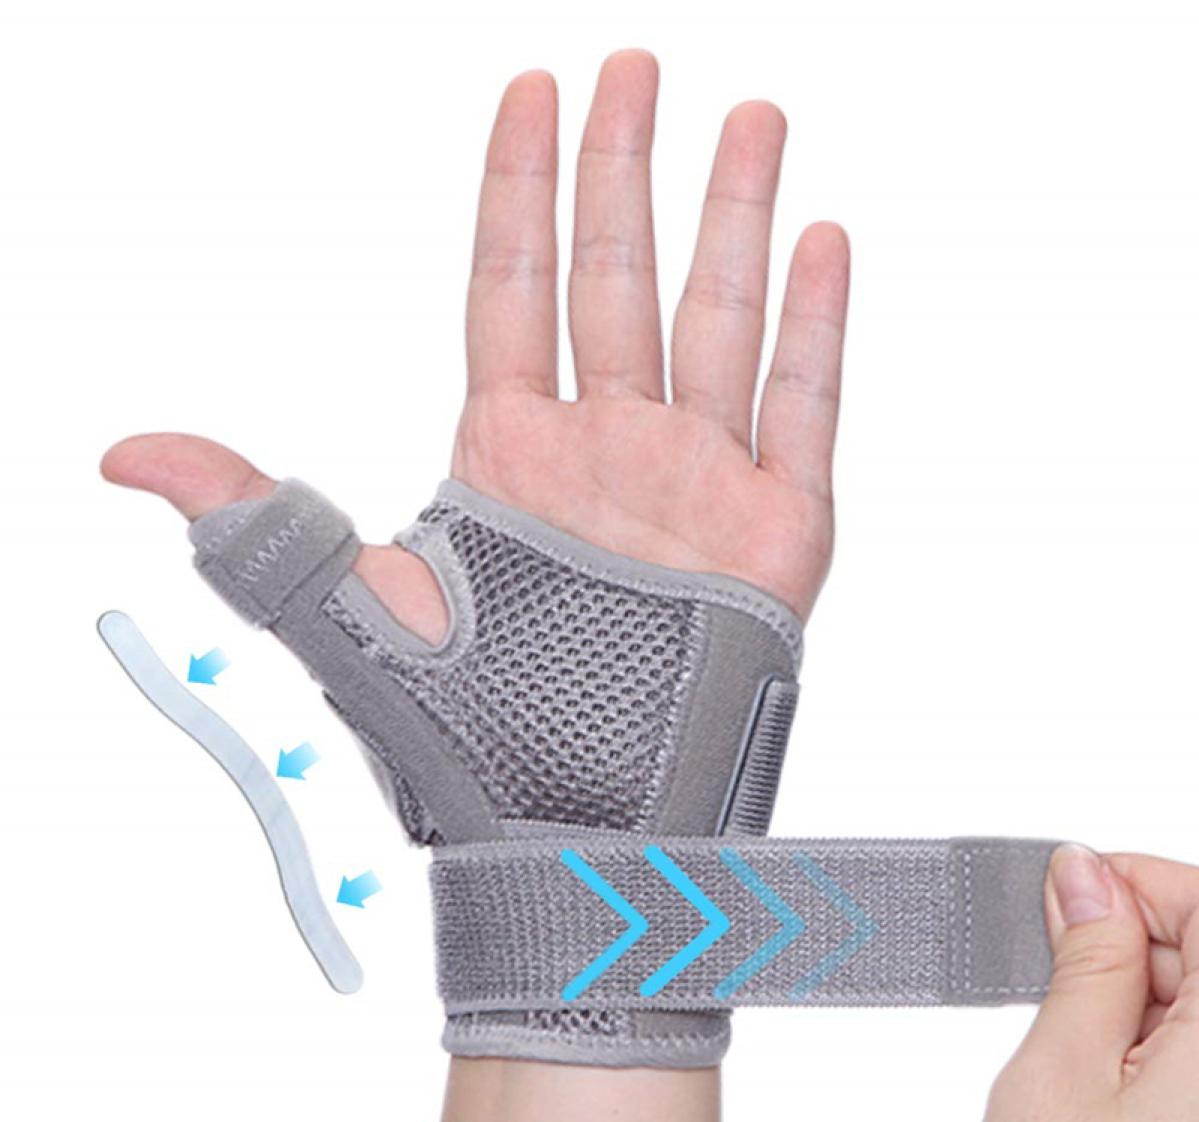 

1PC Thumb Spica Splint Stabilizer Wrist Support Brace Protector Carpal Tunnel Tendonitis Pain Relief Right Left Hand Immobilizer7584553, Red